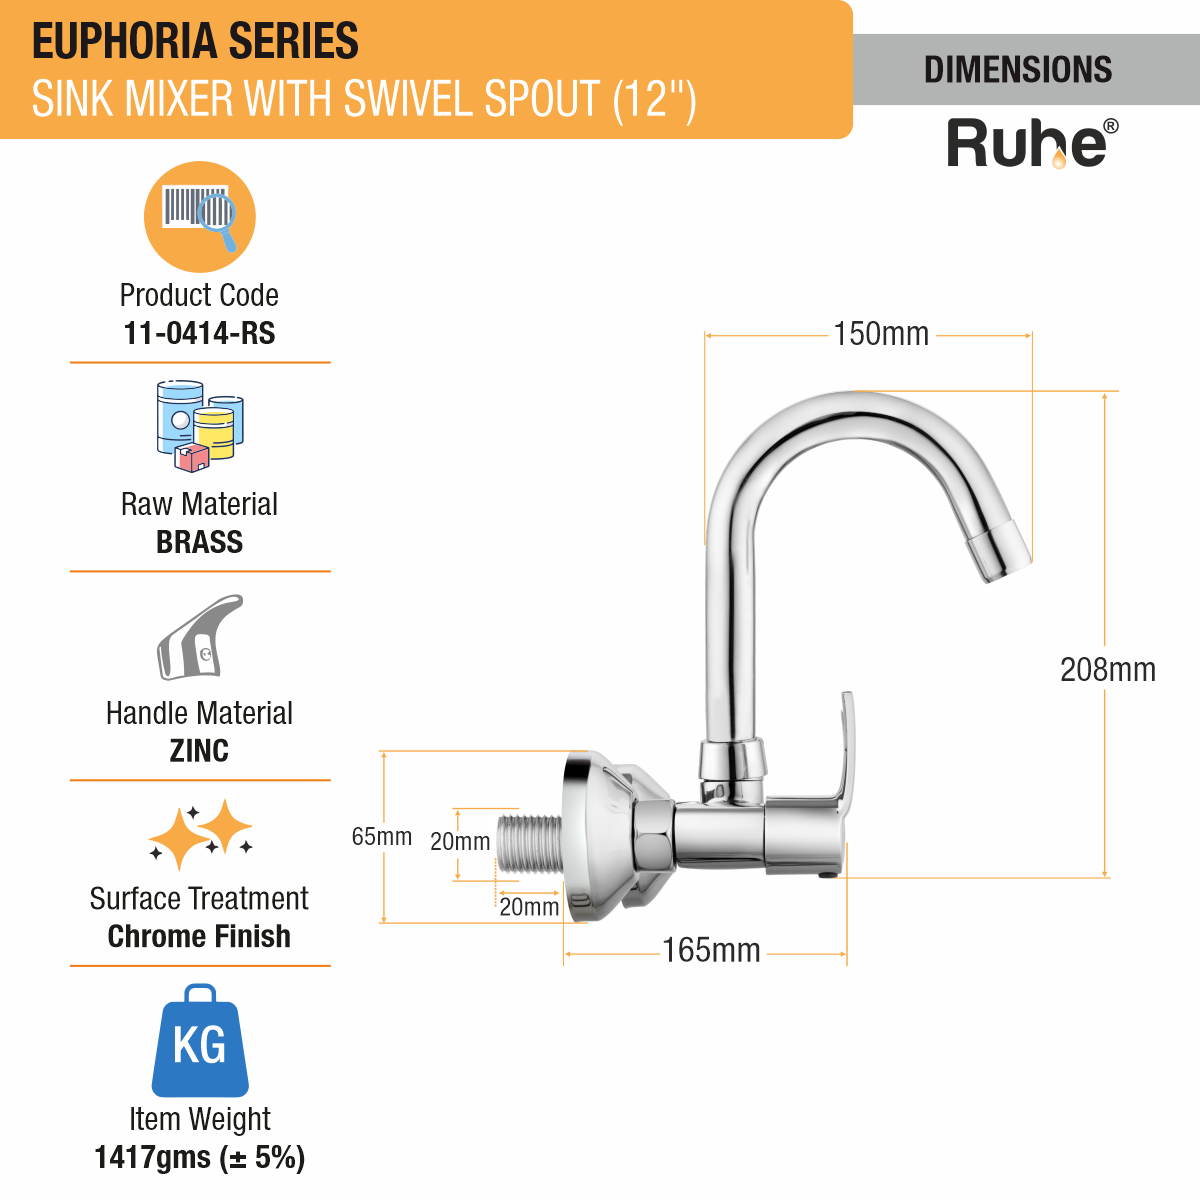 Euphoria Sink Mixer with Small (12 inches) Round Swivel Spout Faucet dimensions and size